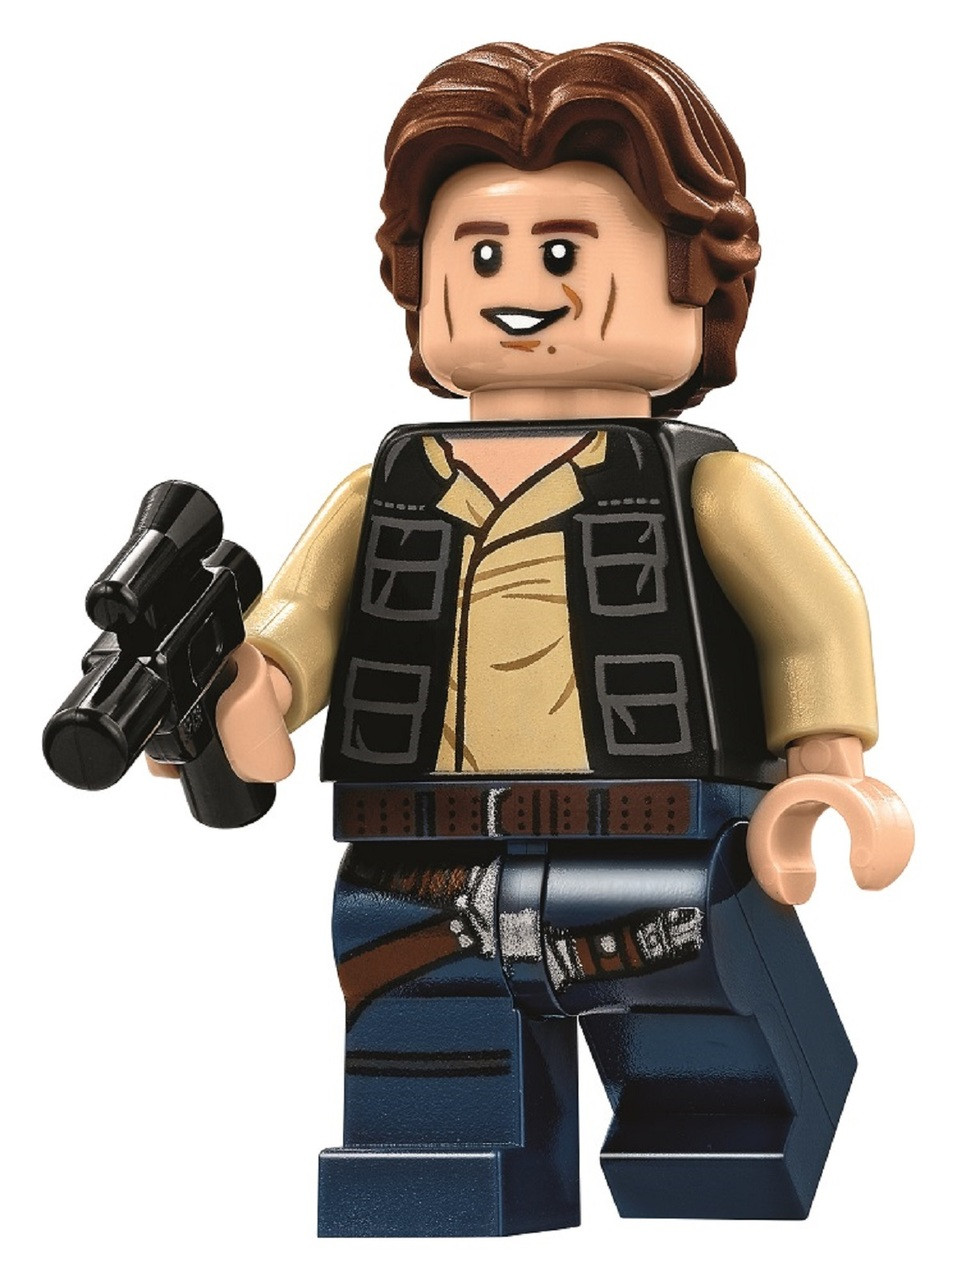 LEGO Star Wars Minifigure from Death 